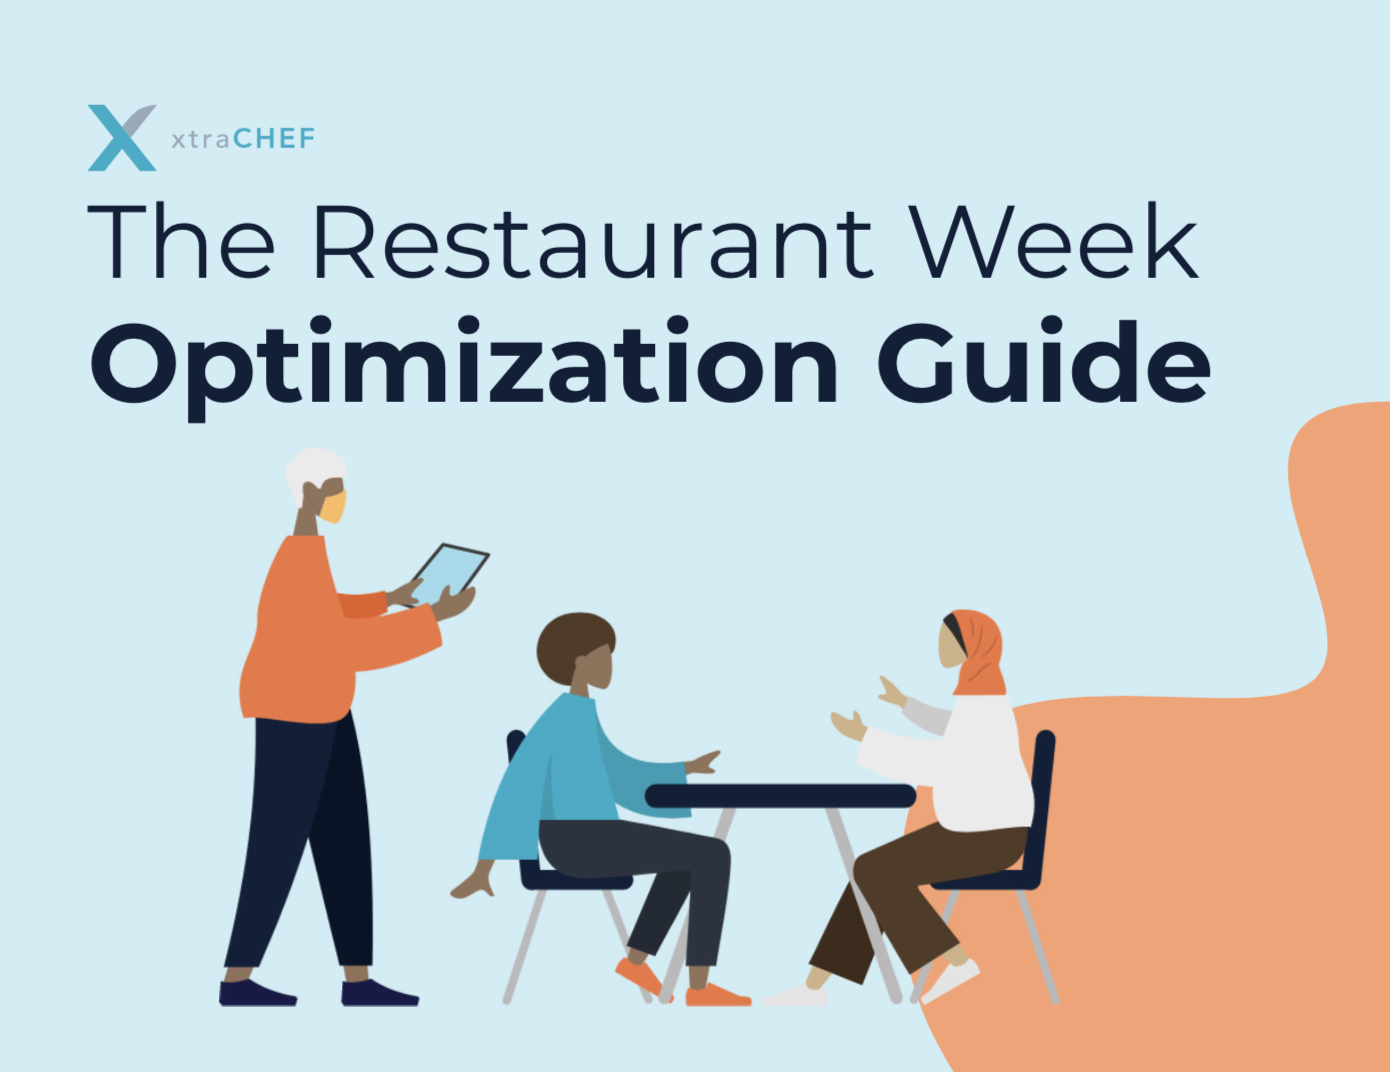 Go from surviving to thriving with these Restaurant Week ideas!